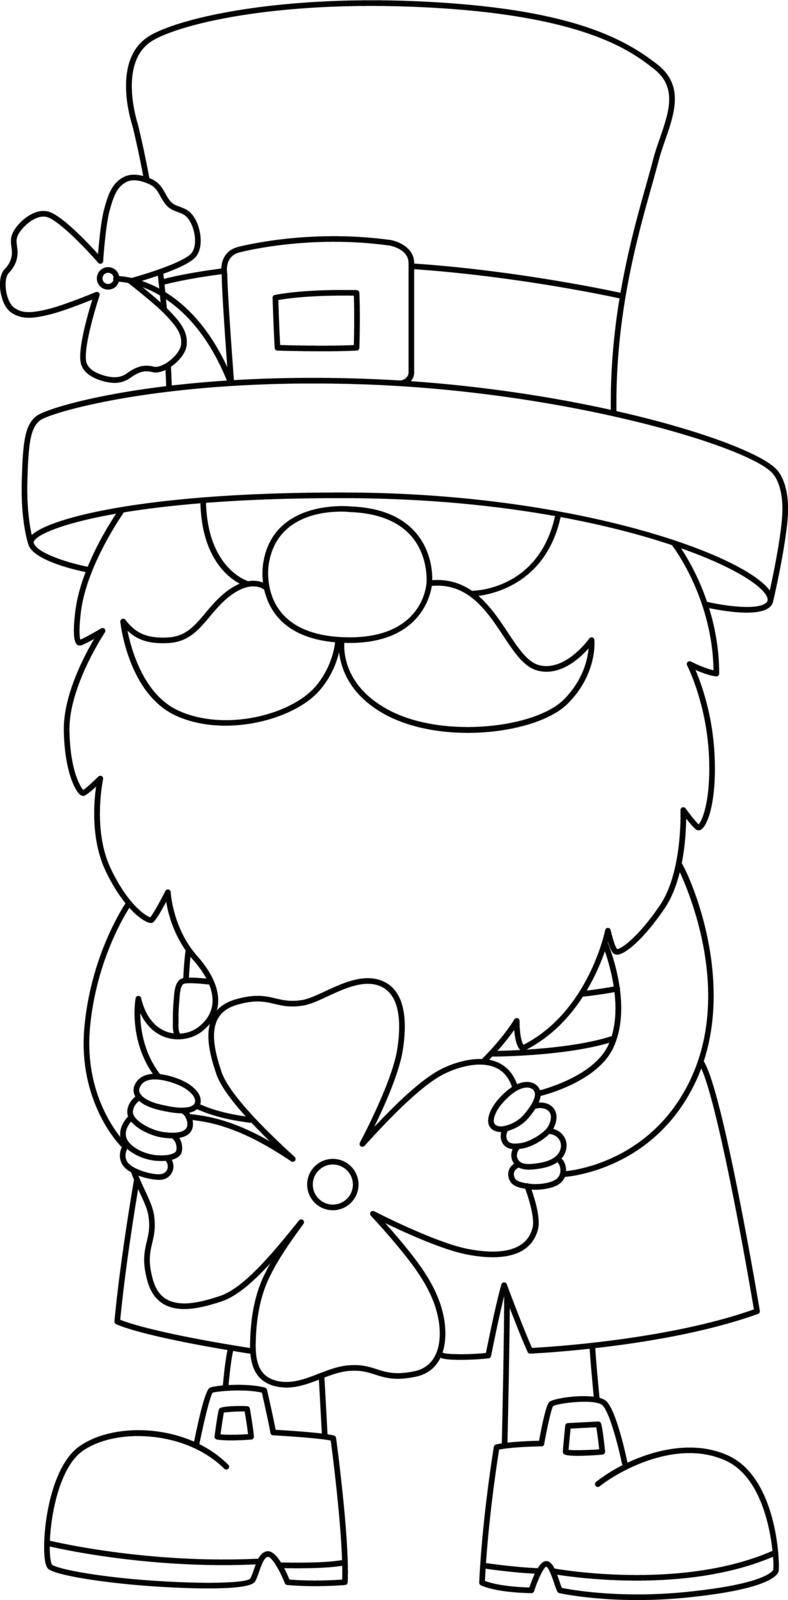 A cute and funny coloring page a St. Patricks Day 2 leprechaun gnome. Provides hours of coloring fun for children. To color, this page is very easy. Suitable for little kids and toddlers.